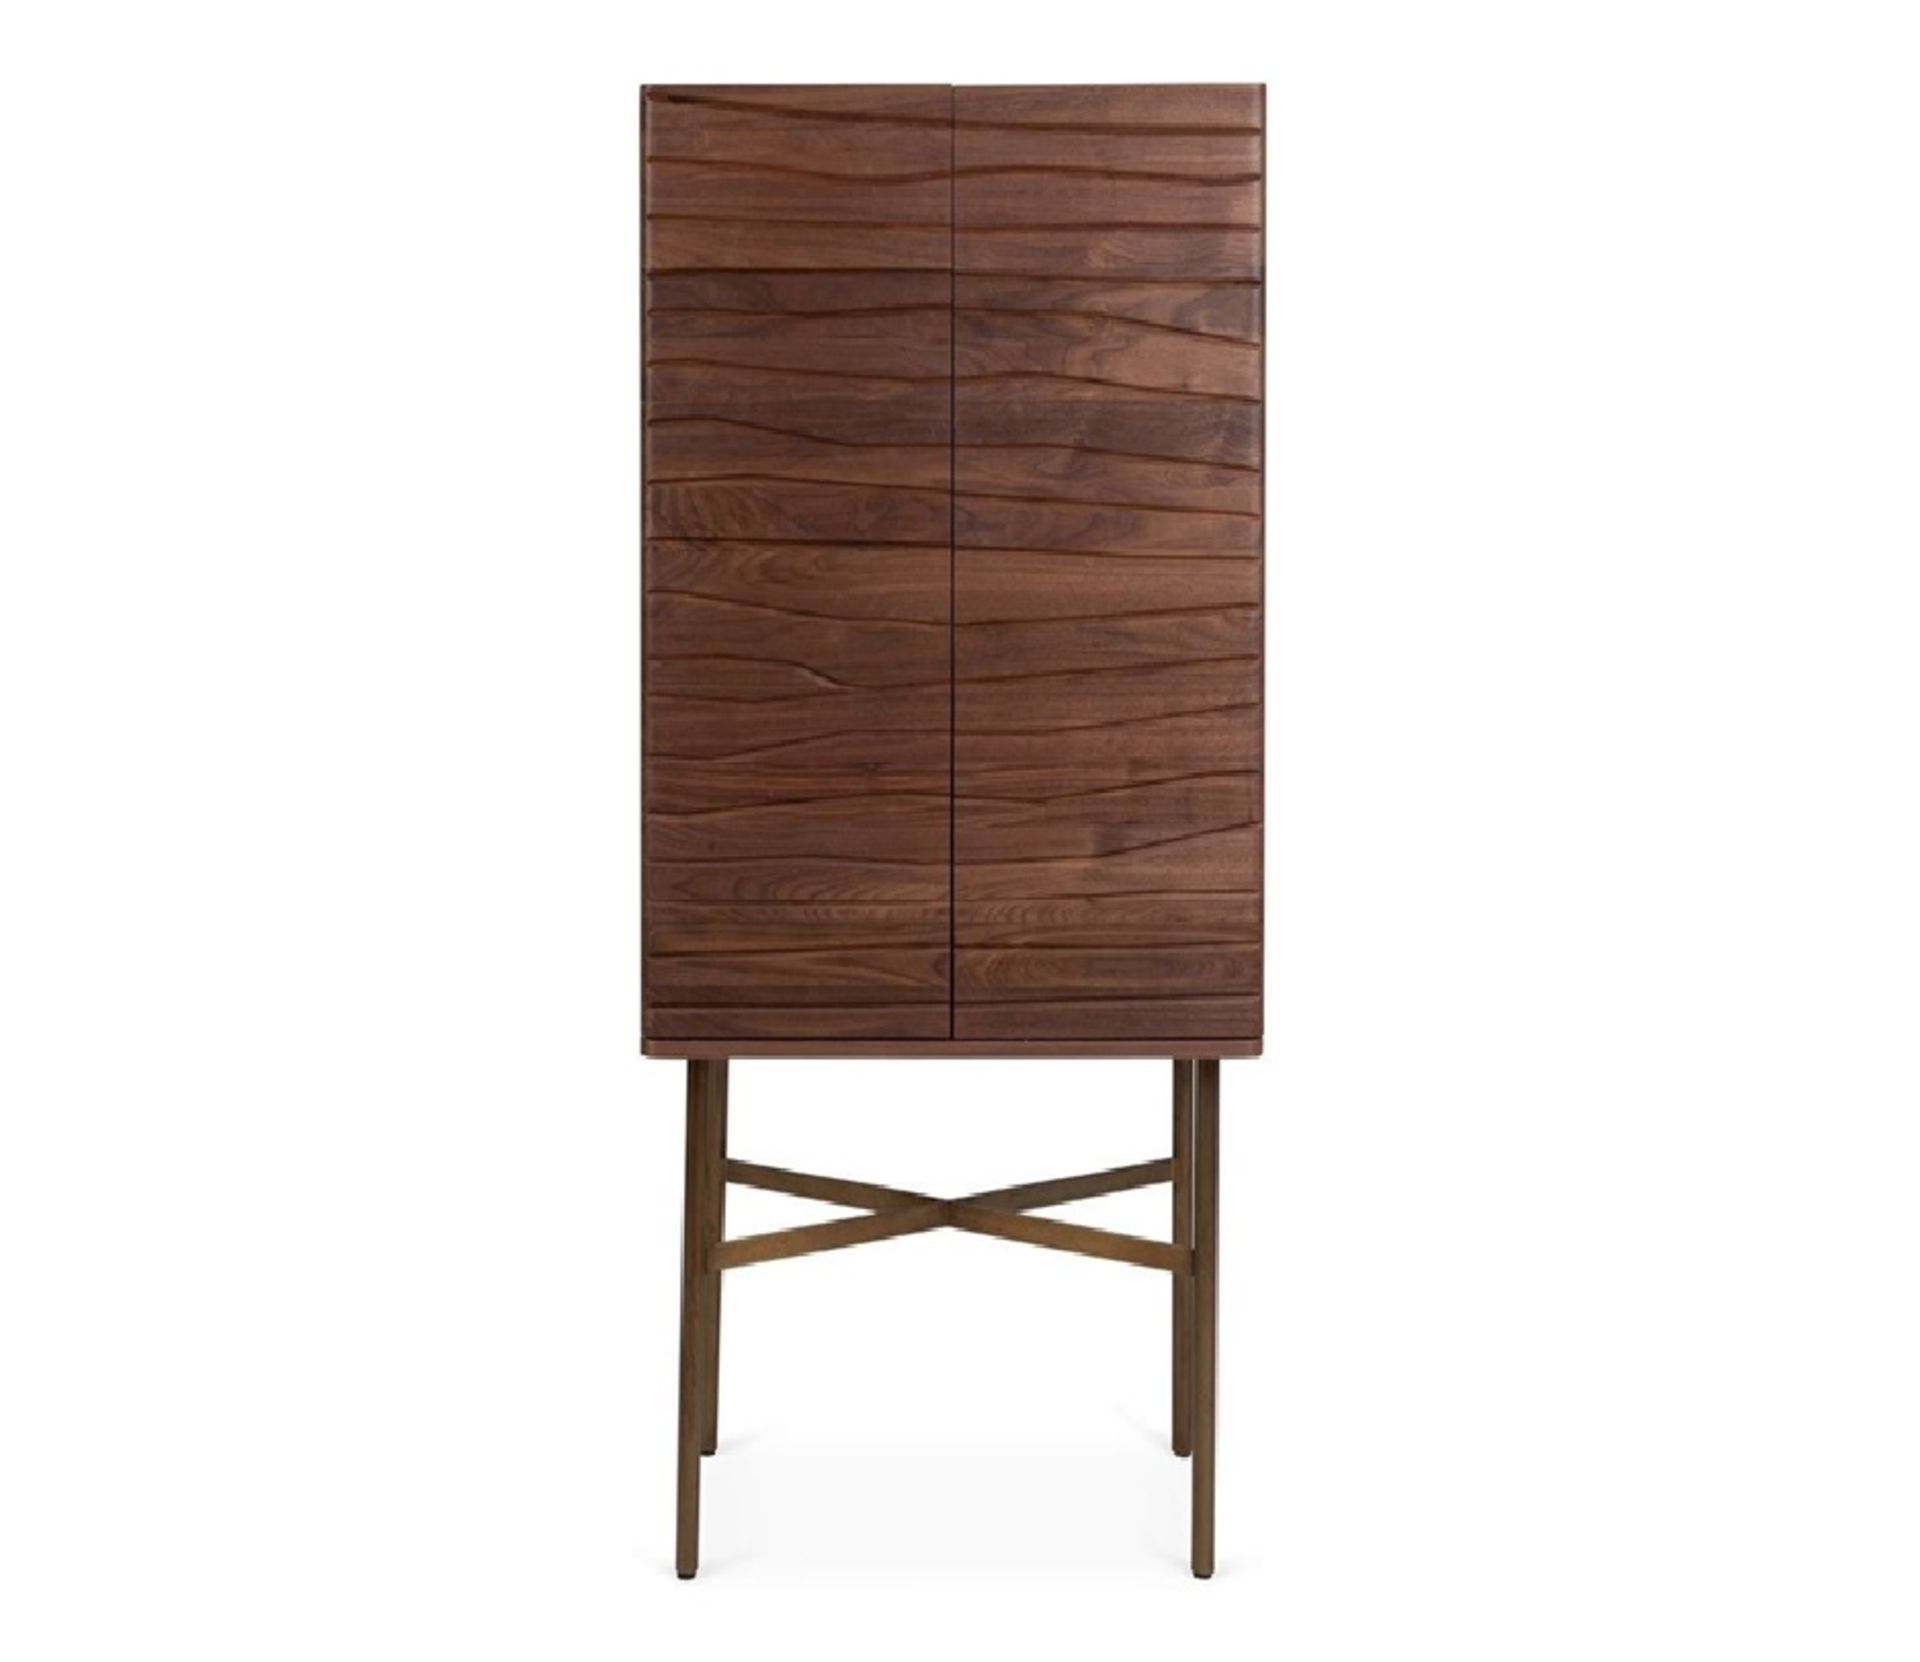 Benwest Cocktail The Walnut Drinks Cabinet is a fusion of minimalist, functional design and - Image 2 of 2